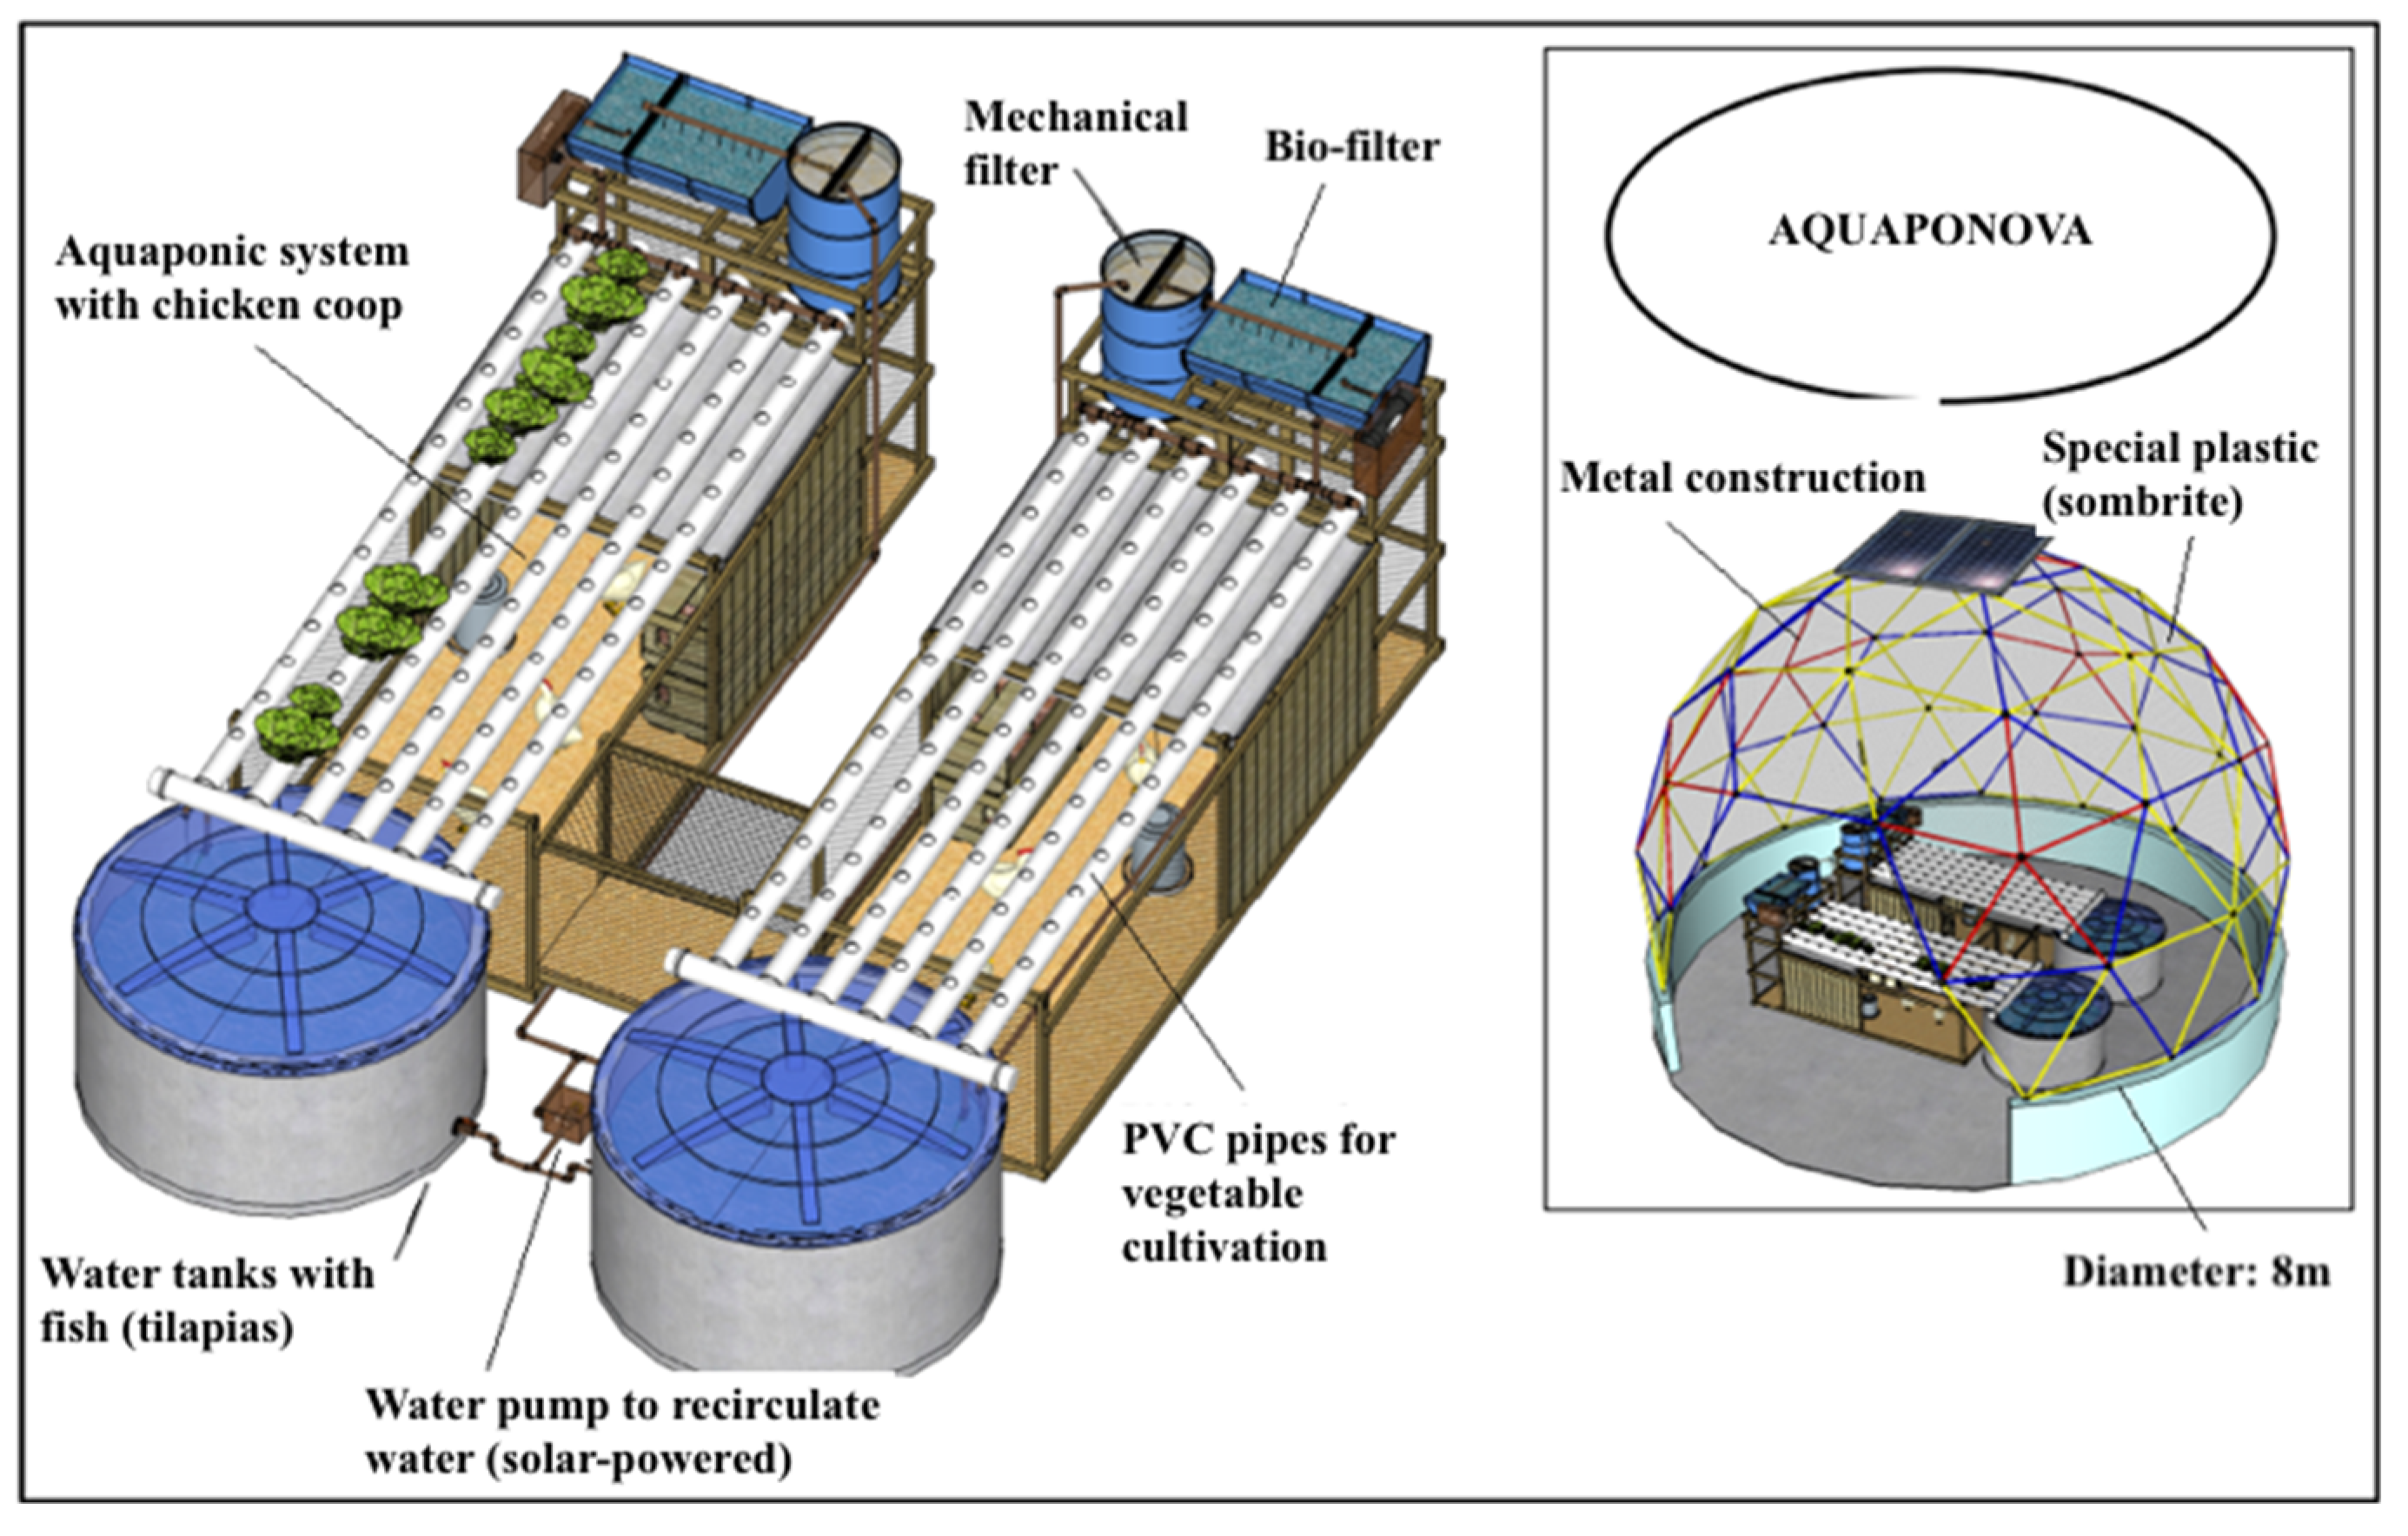 V. Common Challenges and Solutions when Integrating Hens into Aquaponics Systems